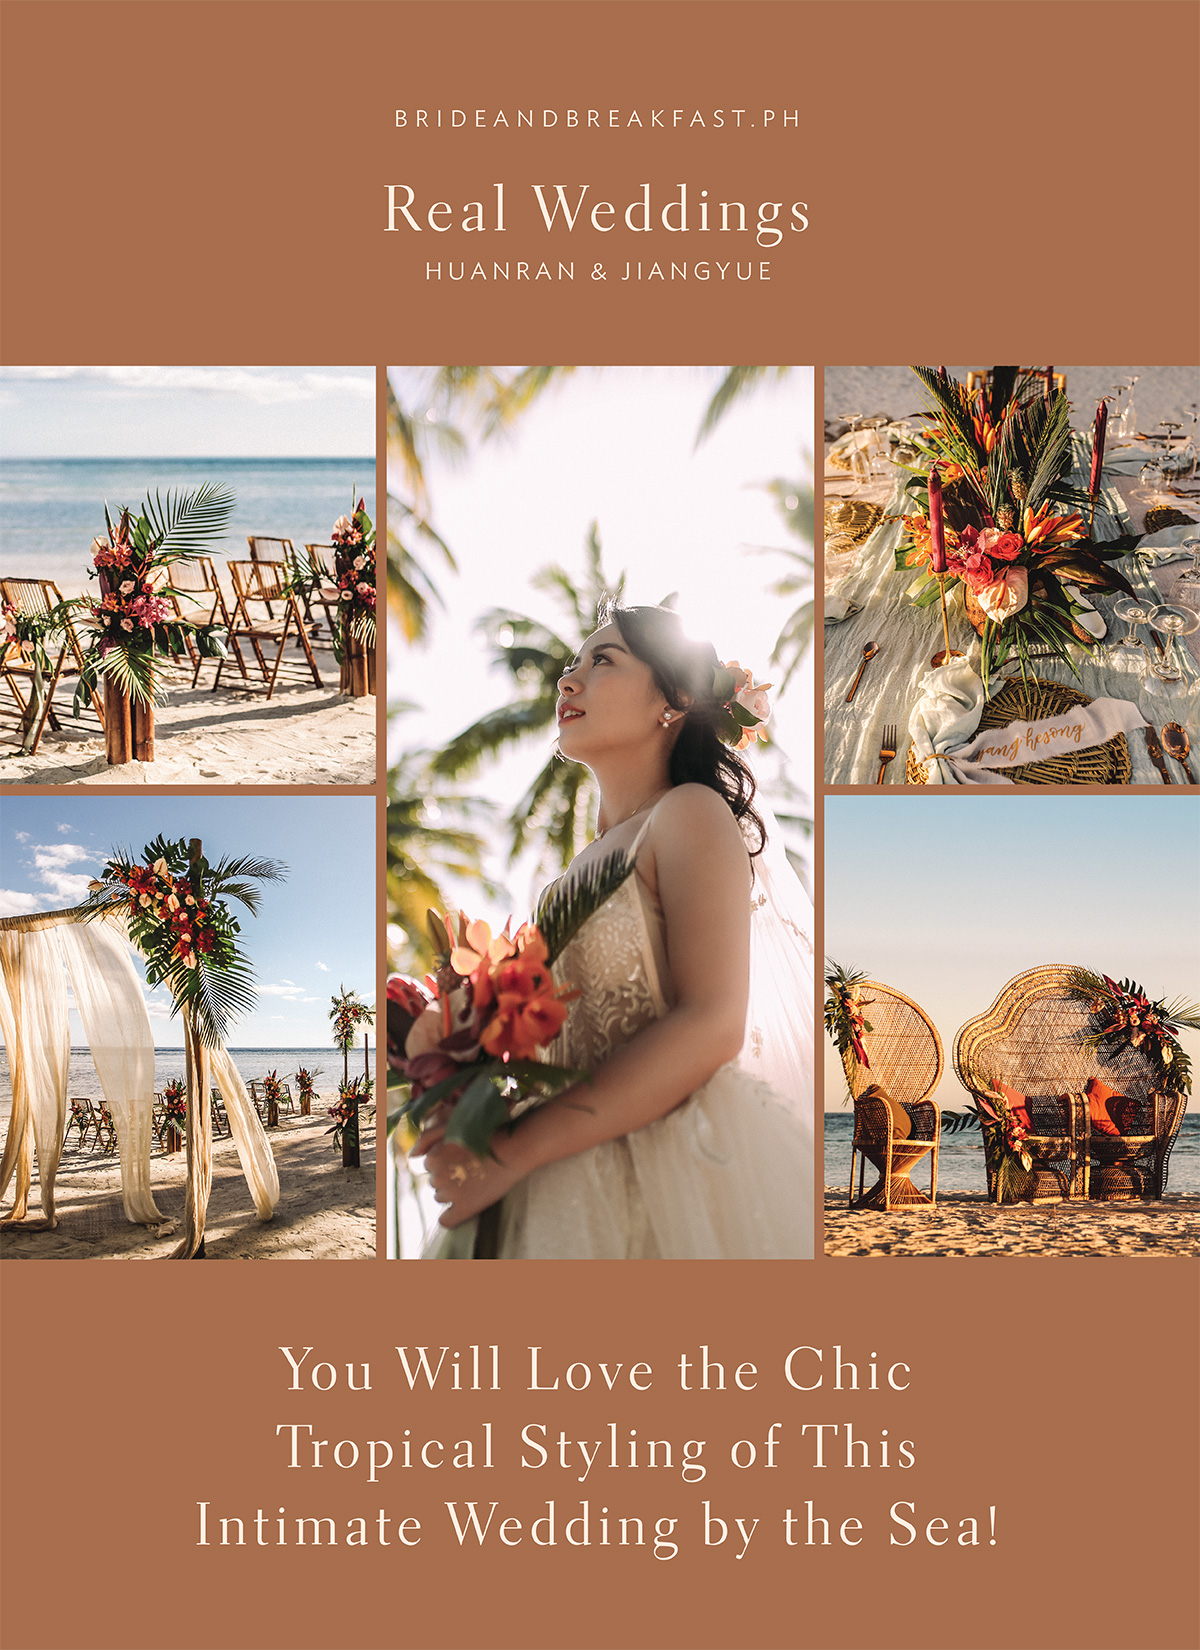 You Will Love the Chic Tropical Styling of This Intimate Wedding by the Sea!